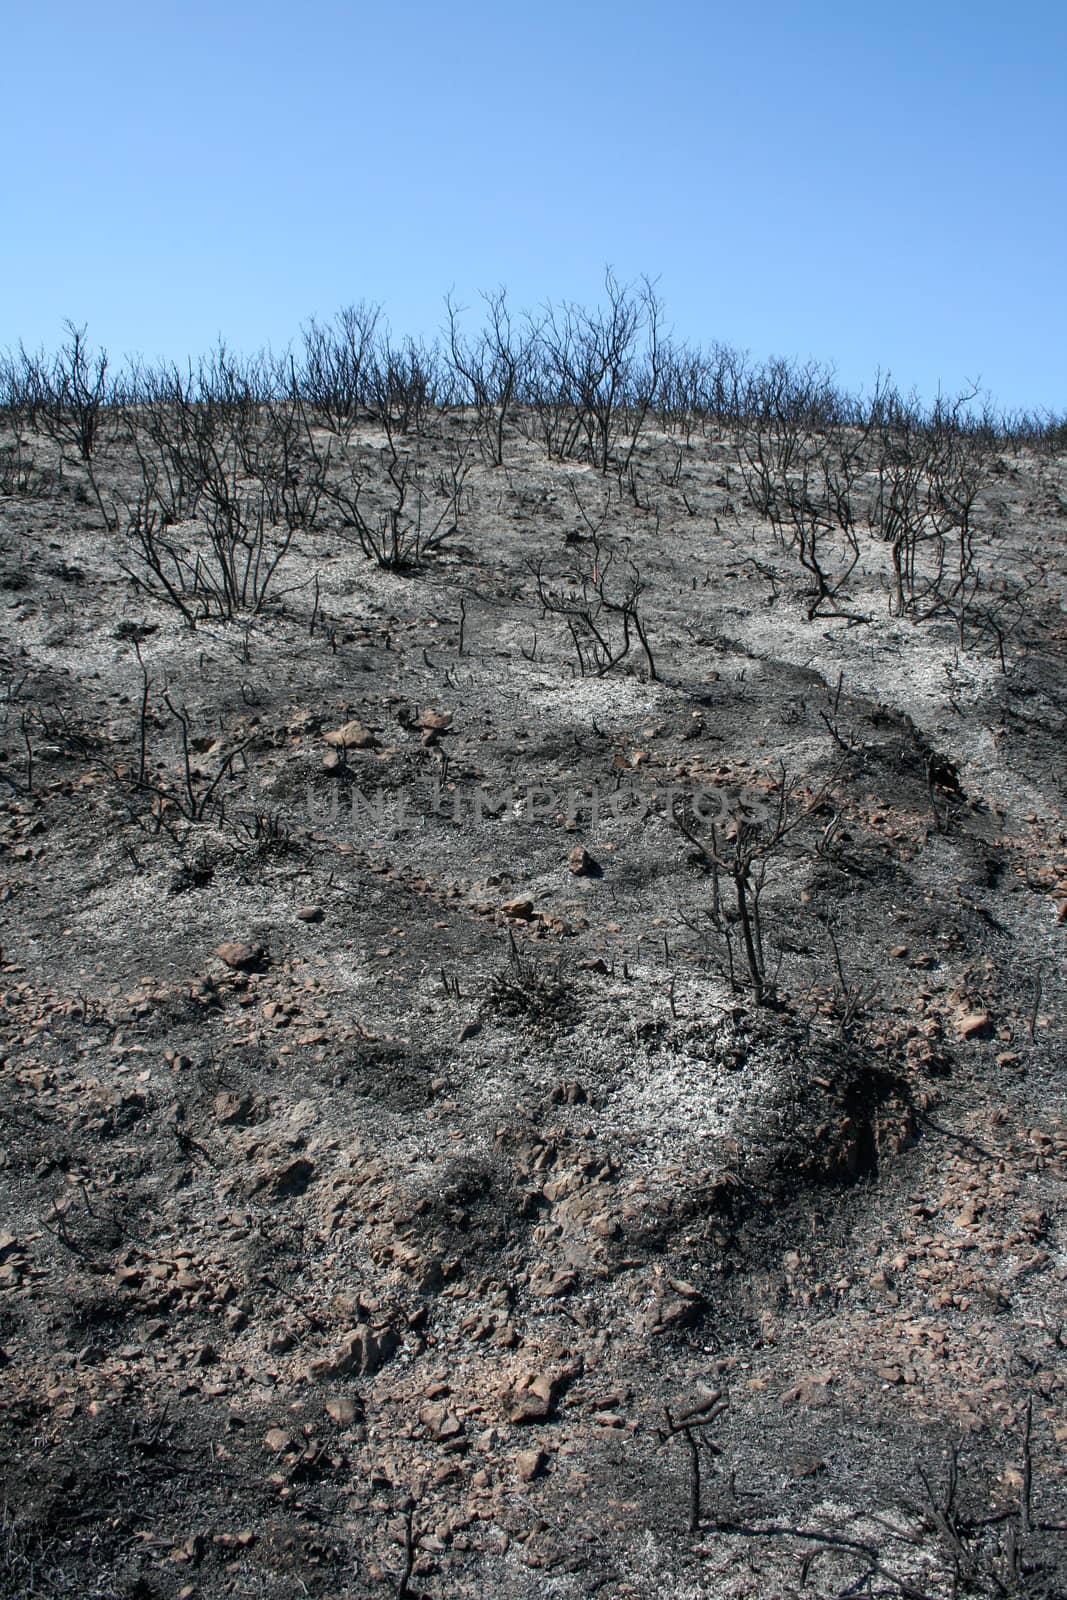 Wildfire ash and burned bushes on grey stone ground